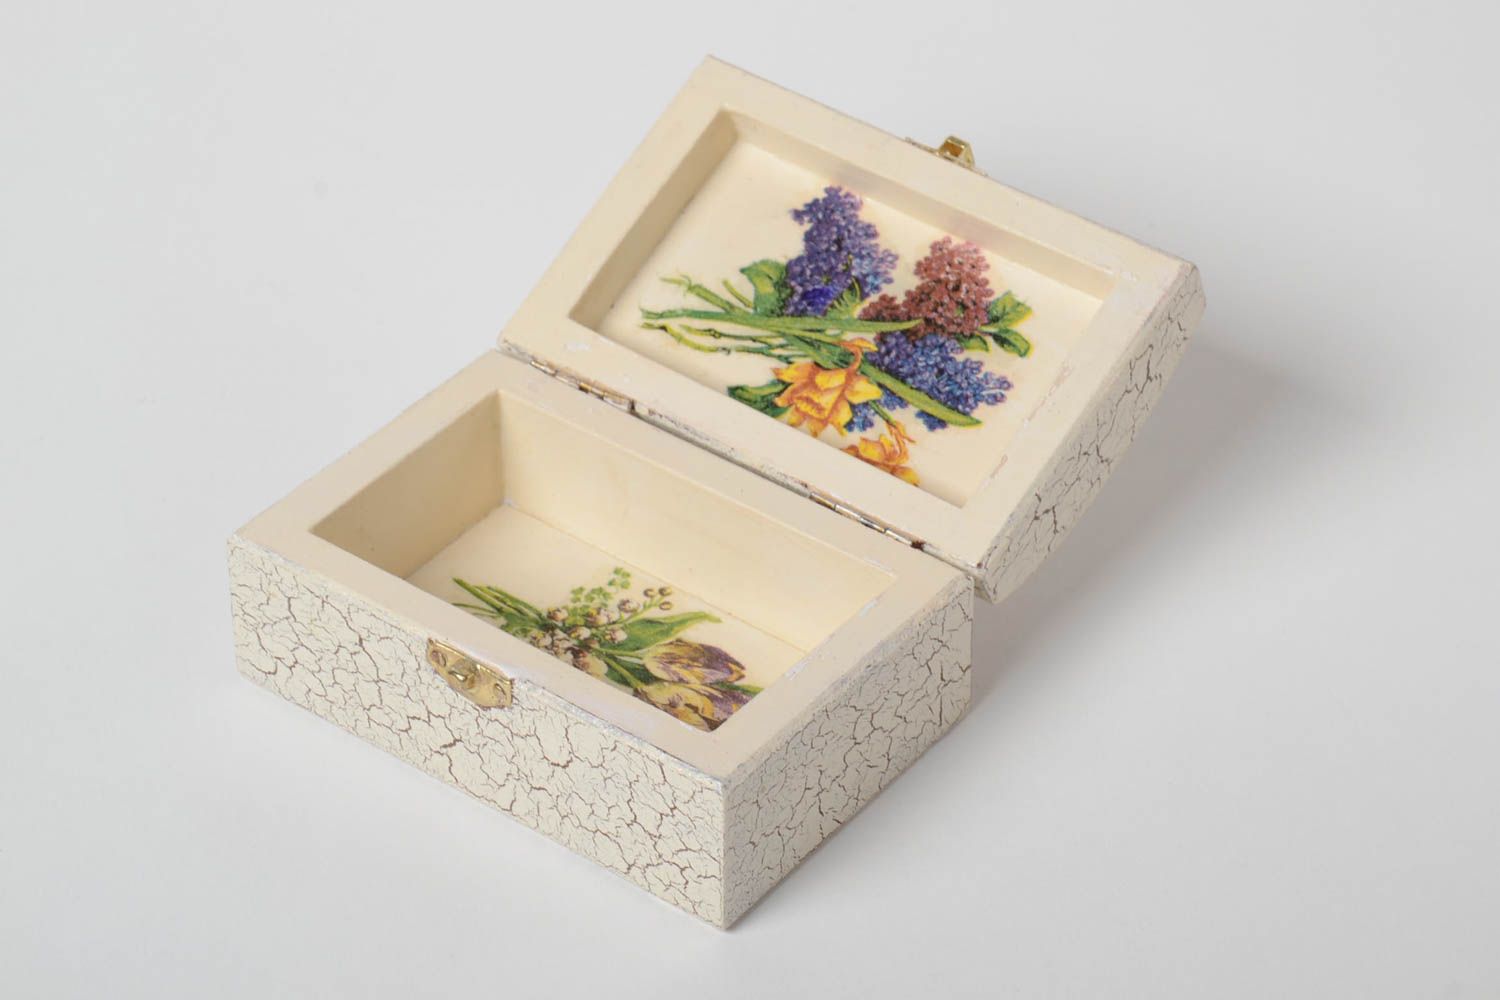 Beautiful handmade wooden jewelry box decoupage wooden box gifts for her photo 3